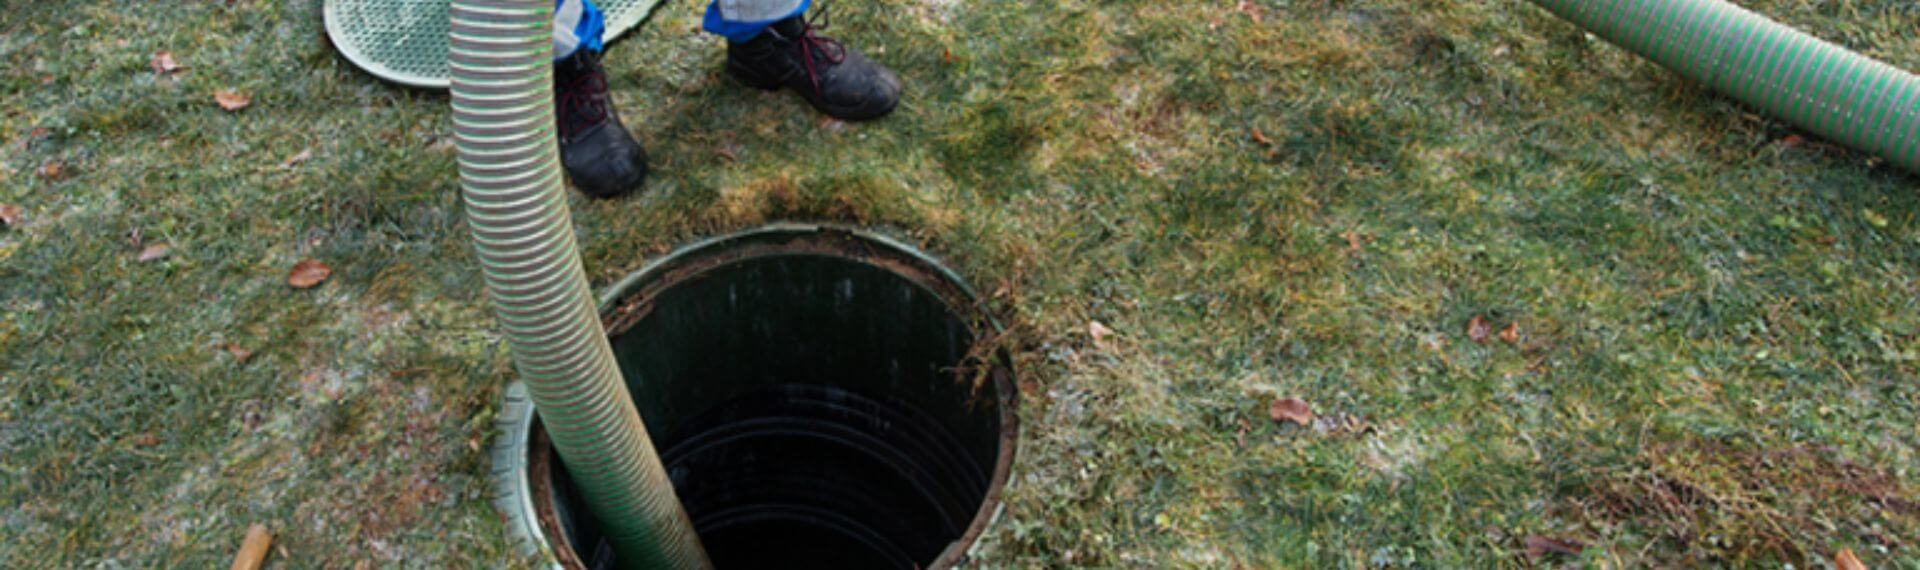 How do I know if my septic tank or treatment plant needs emptying?